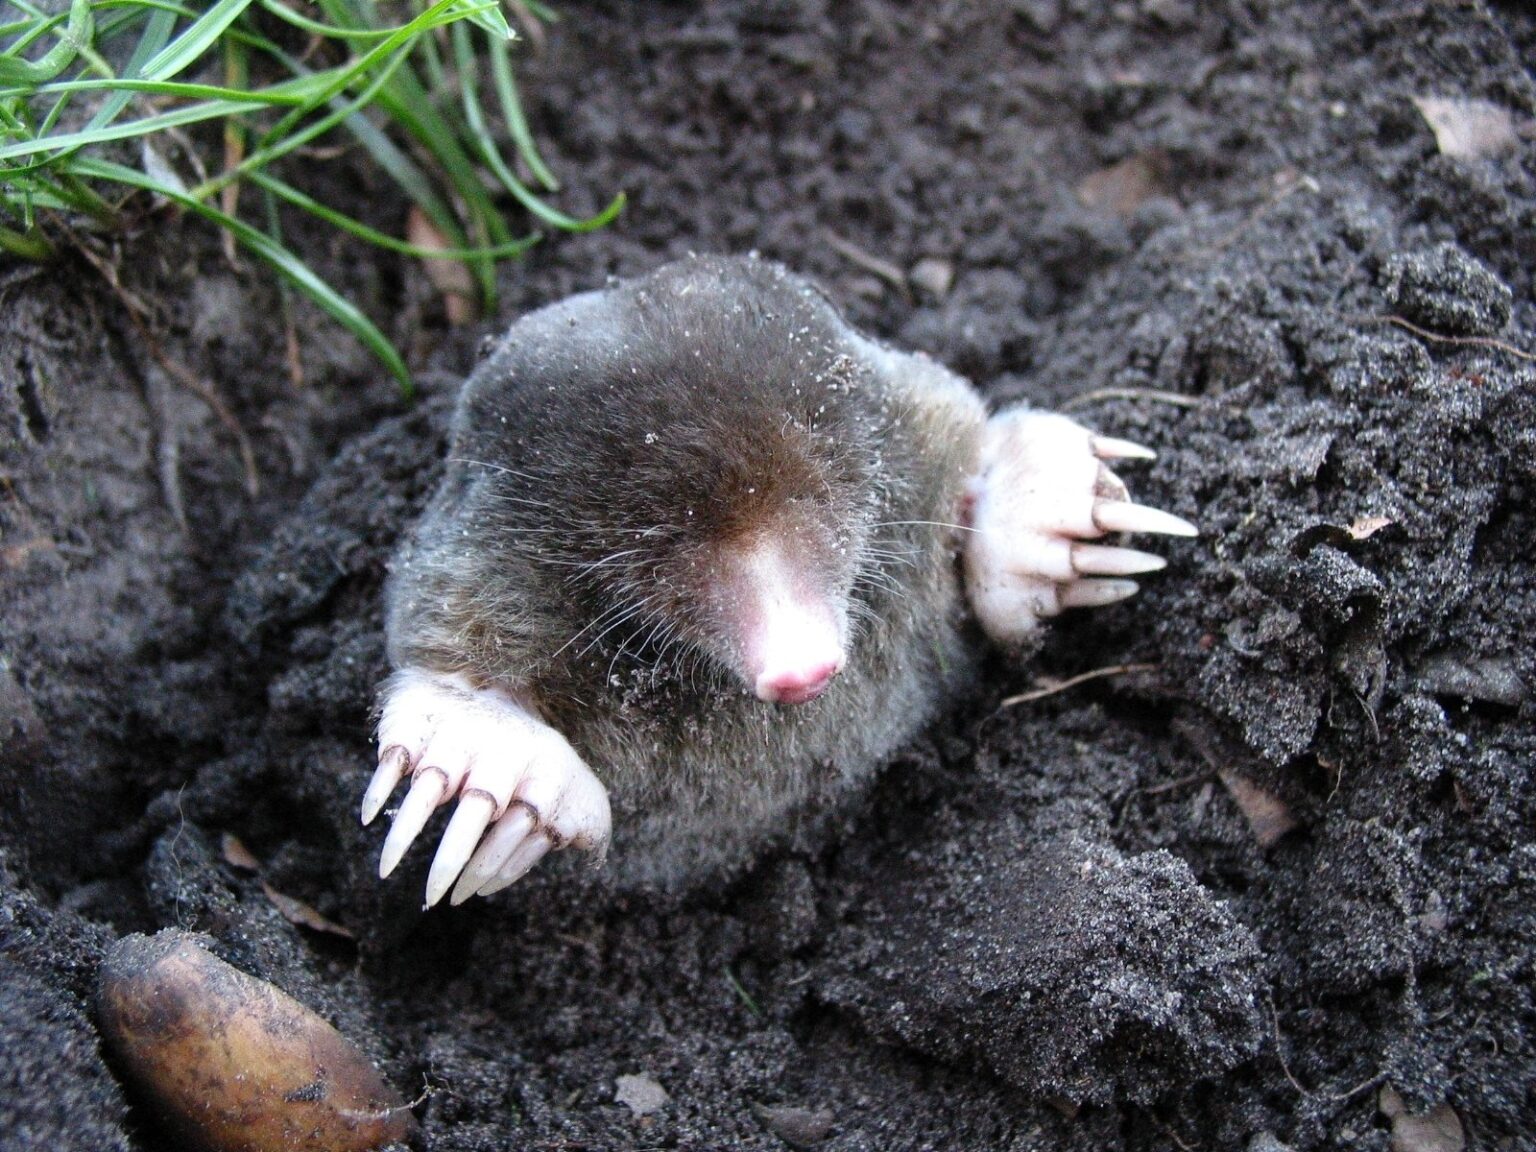 How Much Does It Cost to Remove a Mole From Your Yard?